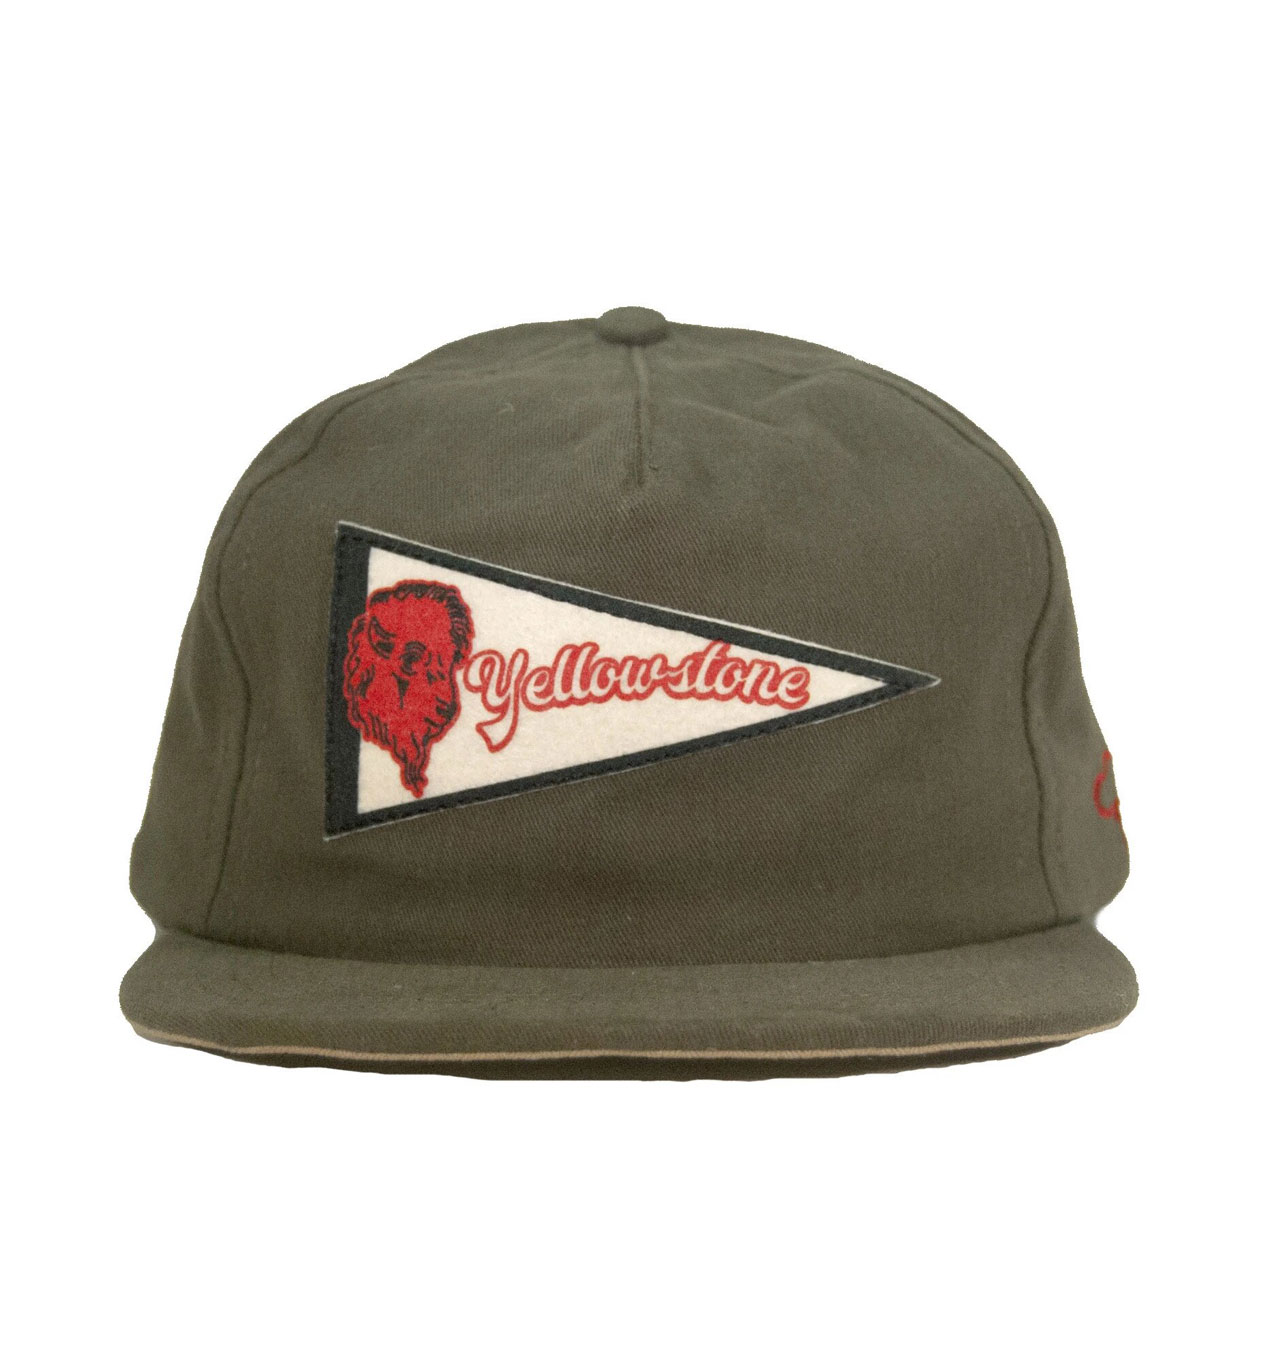 The Ampal Creative - Yellowstone Pennant Strapback - Olive